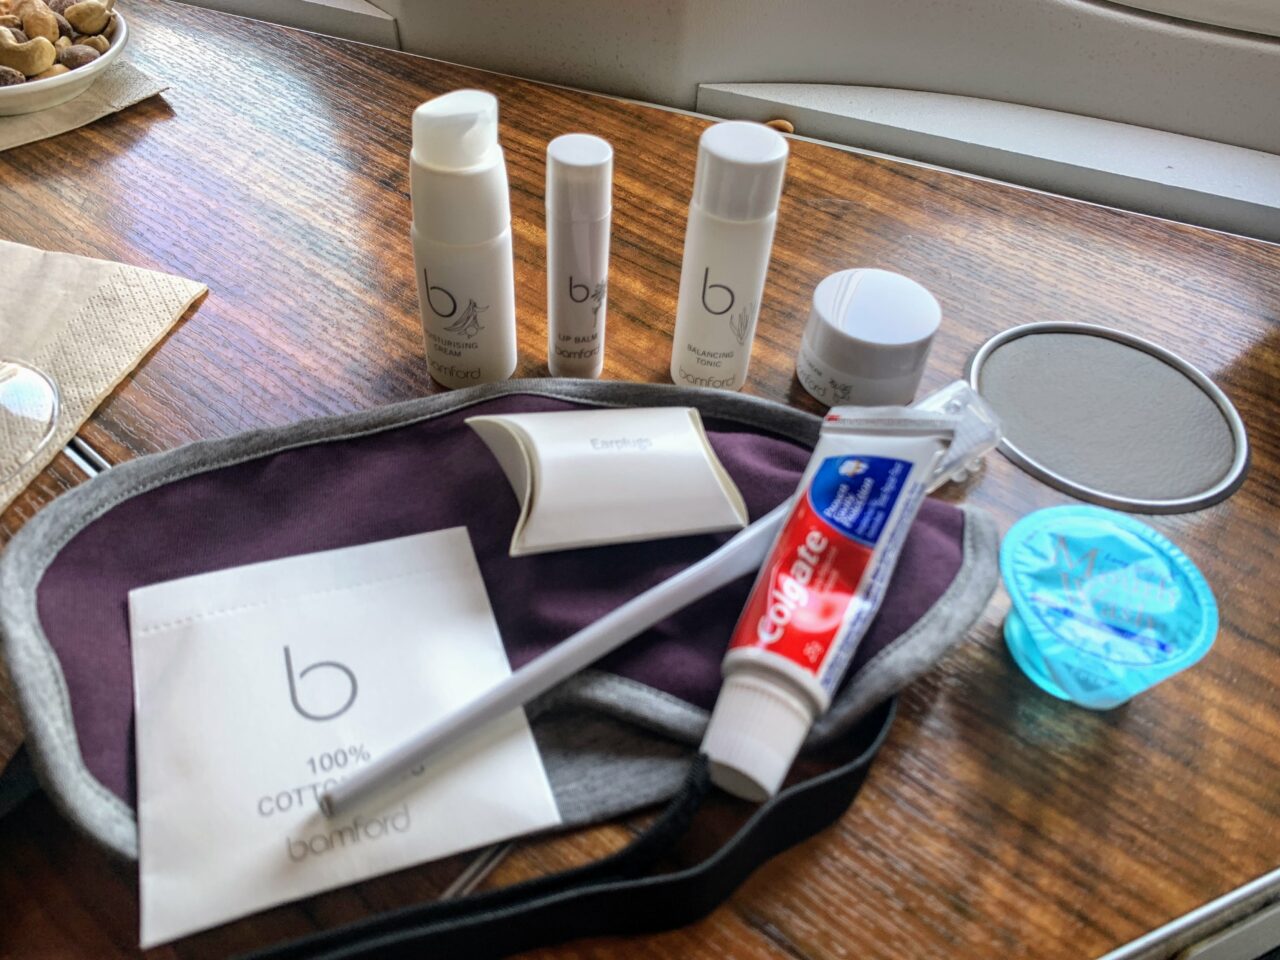 Cathay Pacific First Class Amenity Kit 